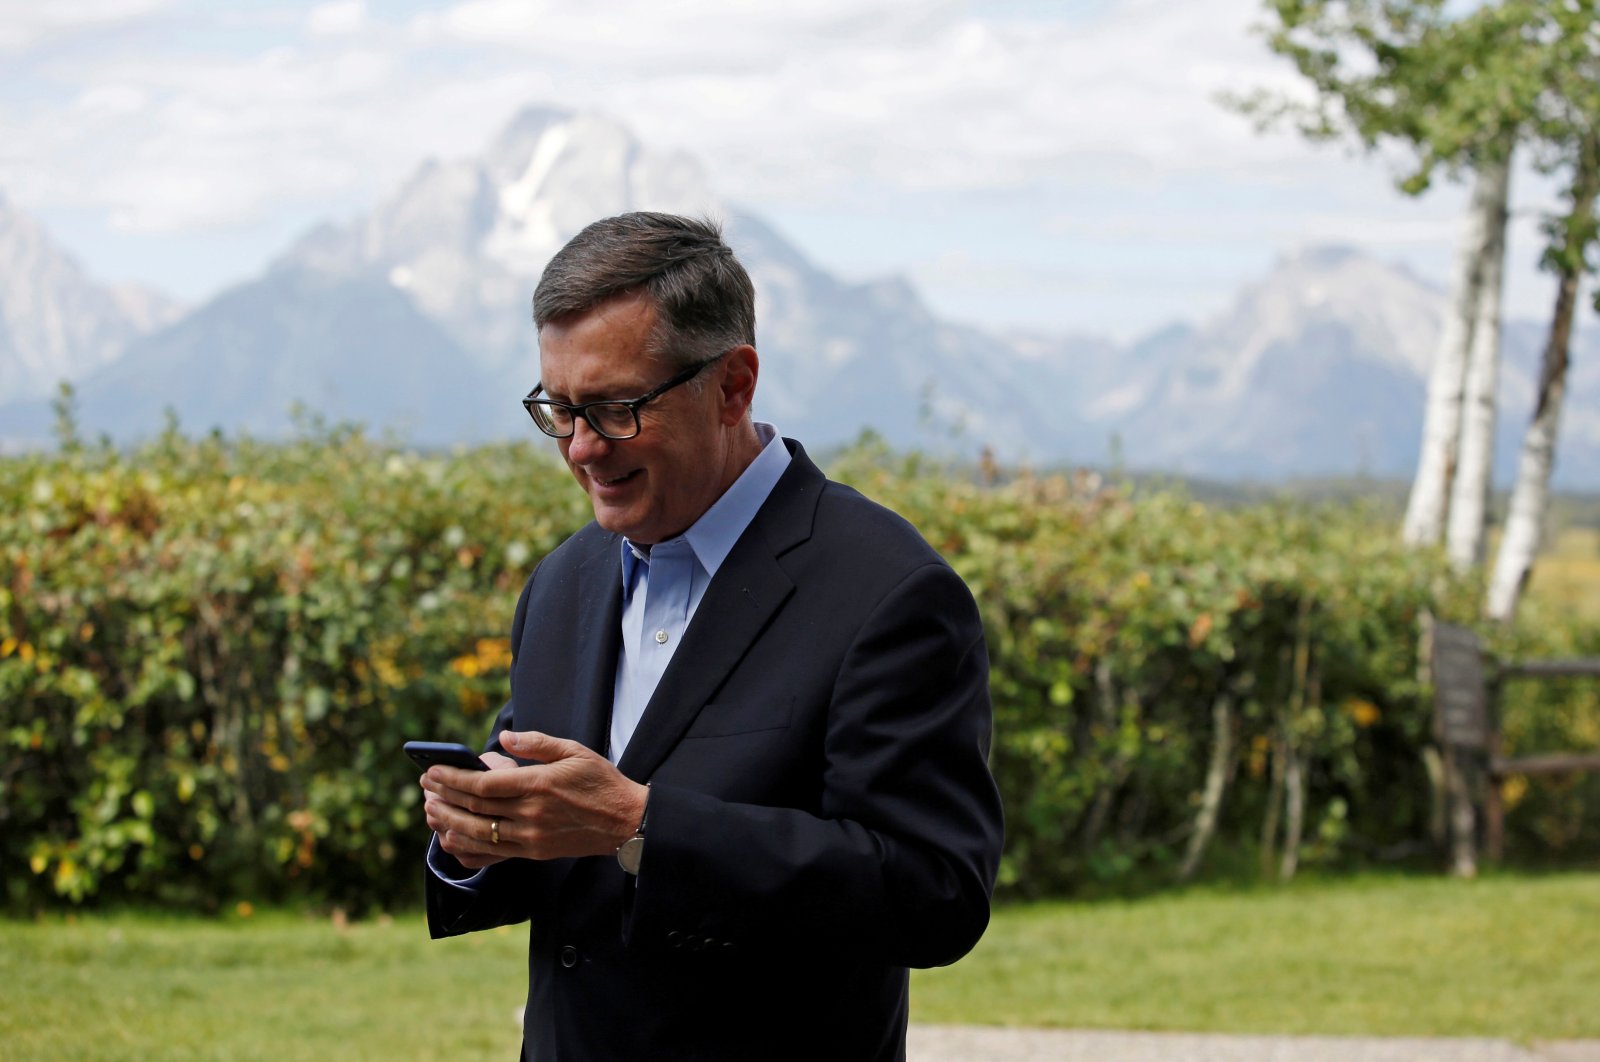 U.S. Federal Reserve Vice Chair Richard Clarida reacts as he holds his phone during the three-day "Challenges for Monetary Policy" conference in Jackson Hole, Wyoming, U.S., Aug. 23, 2019. (Reuters Photo)